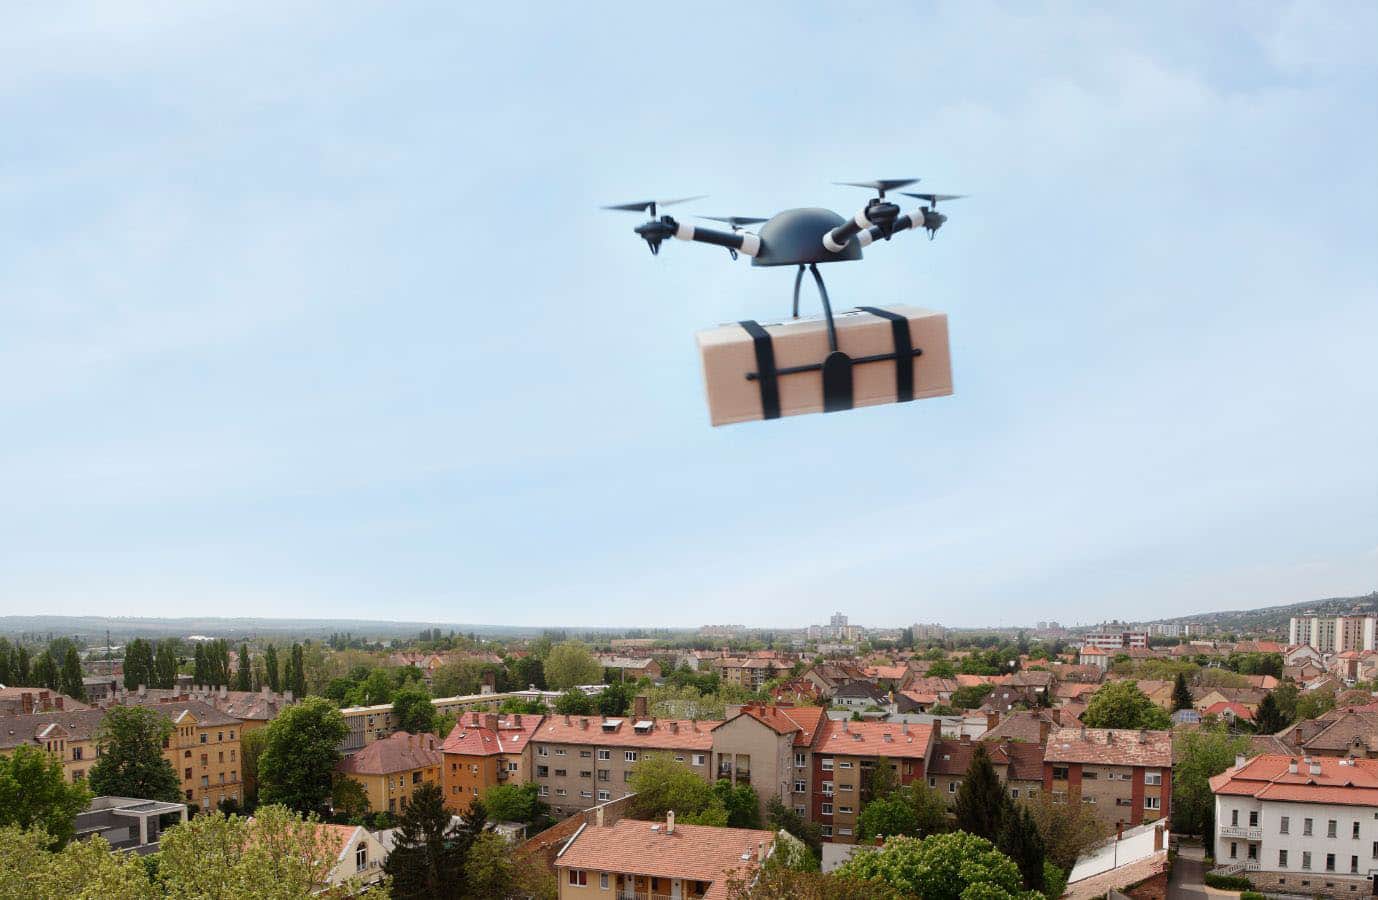 Have your say on drone delivery services